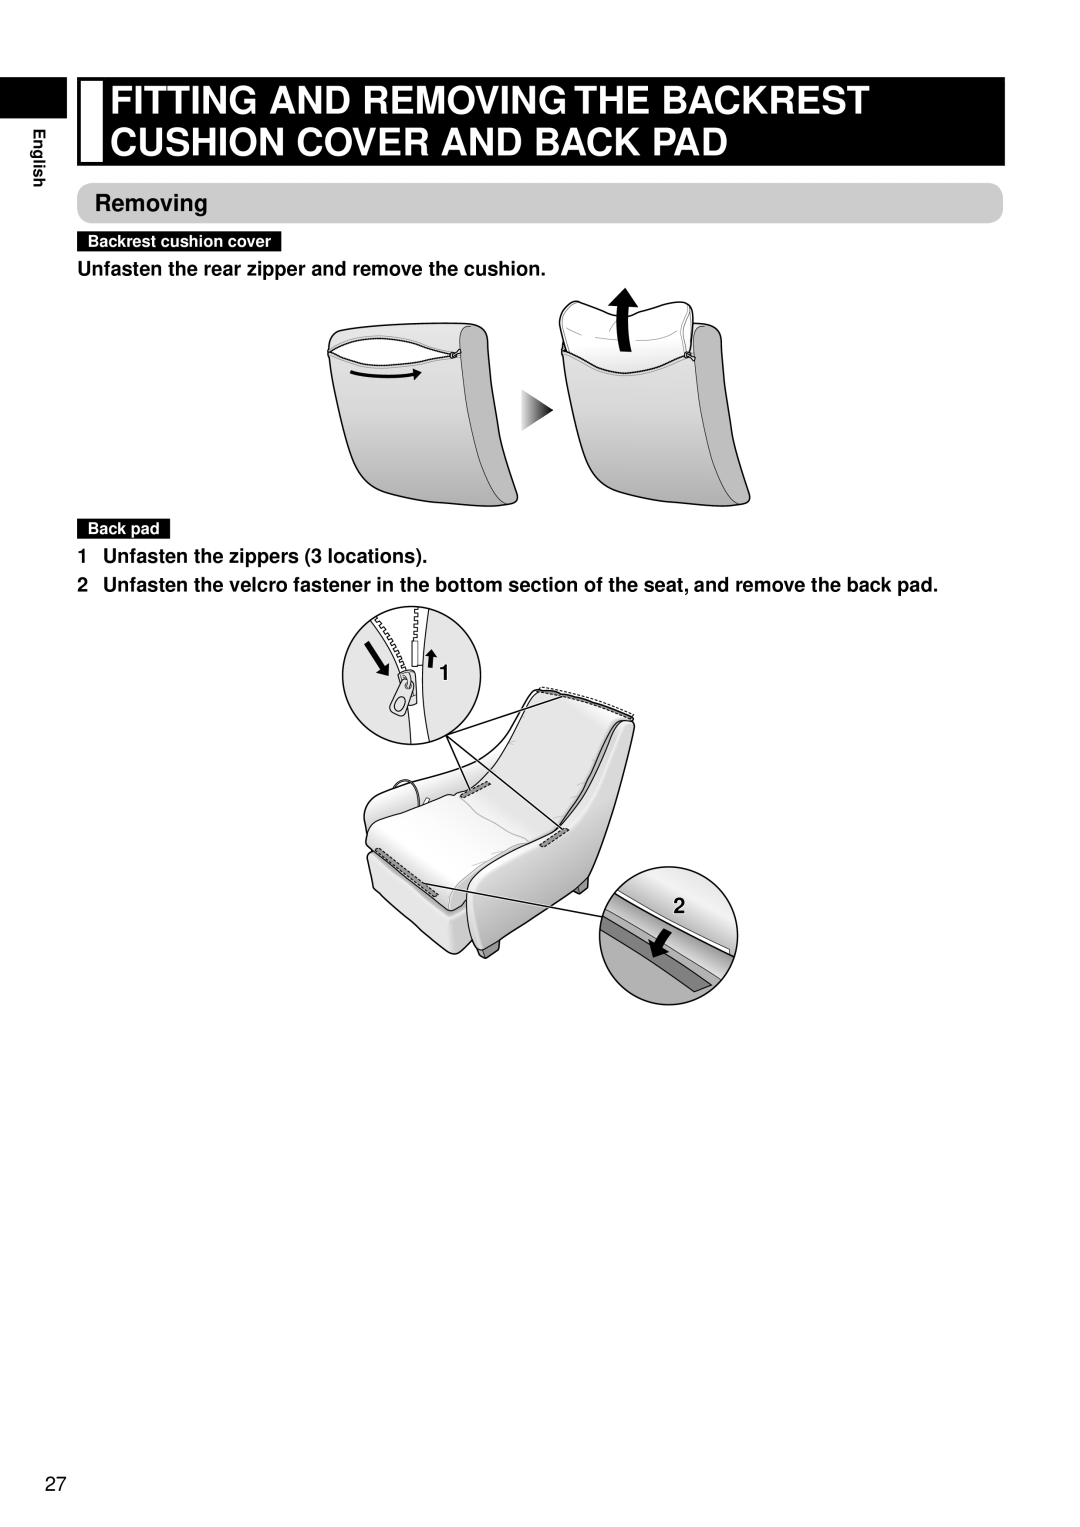 Panasonic EP-MS40 manual Fitting And Removing The Backrest Cushion Cover And Back Pad, Backrest cushion cover, Back pad 